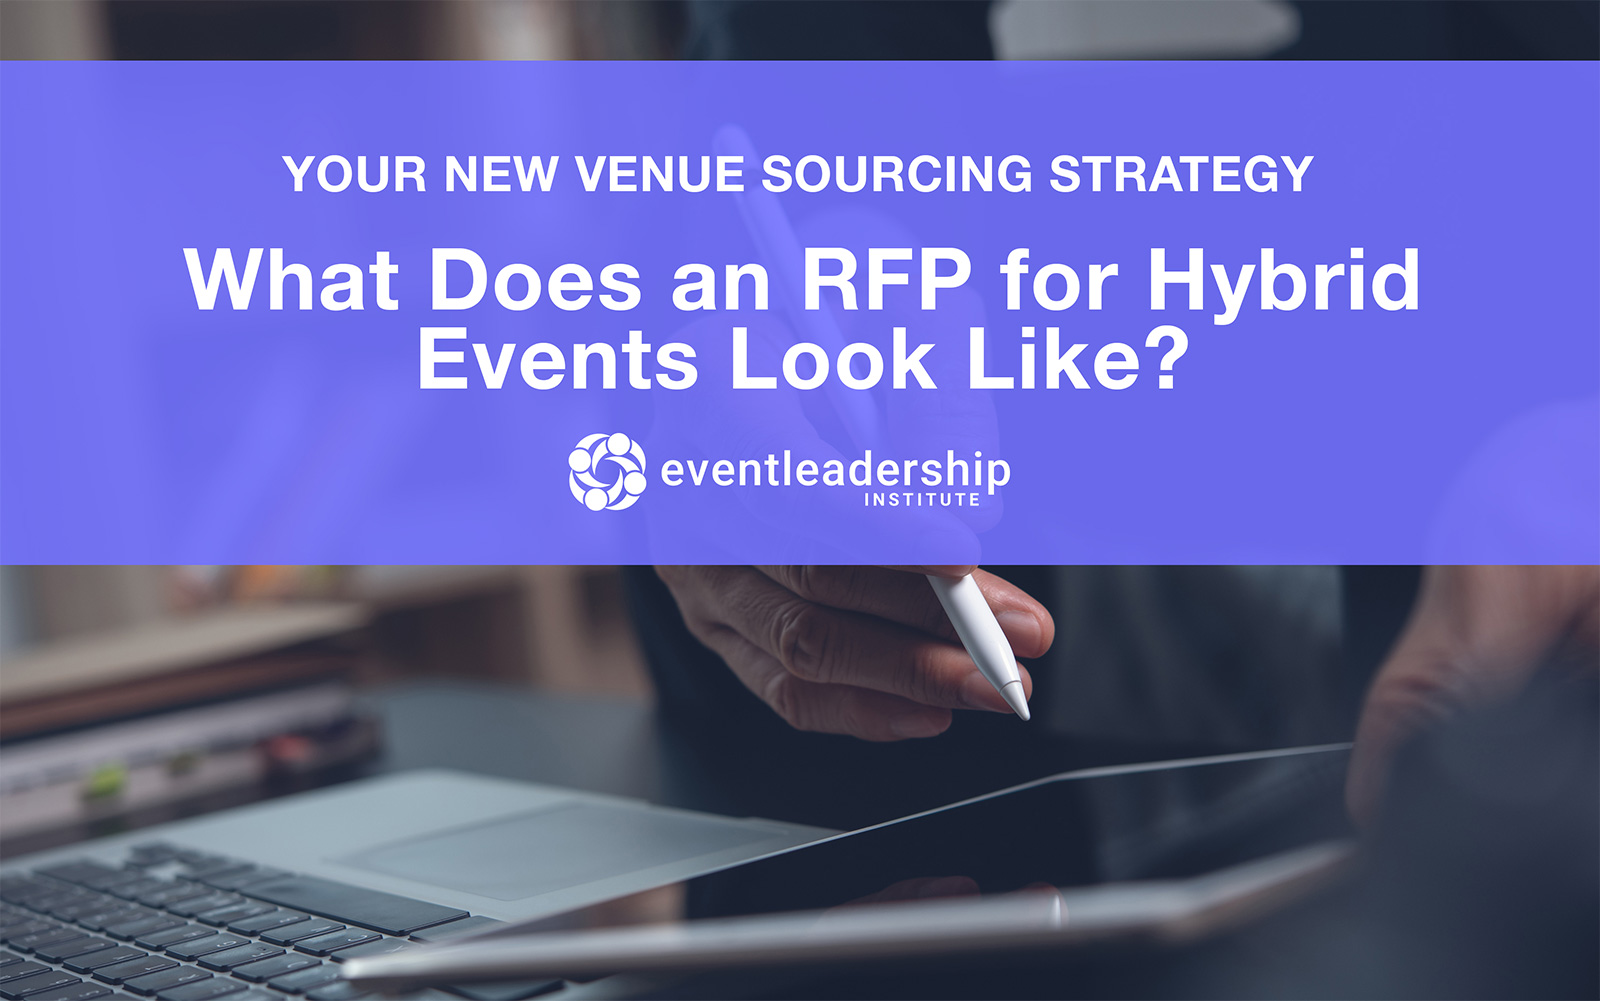 Webinar: What Does an RFP for Hybrid Events Look Like? (Recorded June 30, 2021)